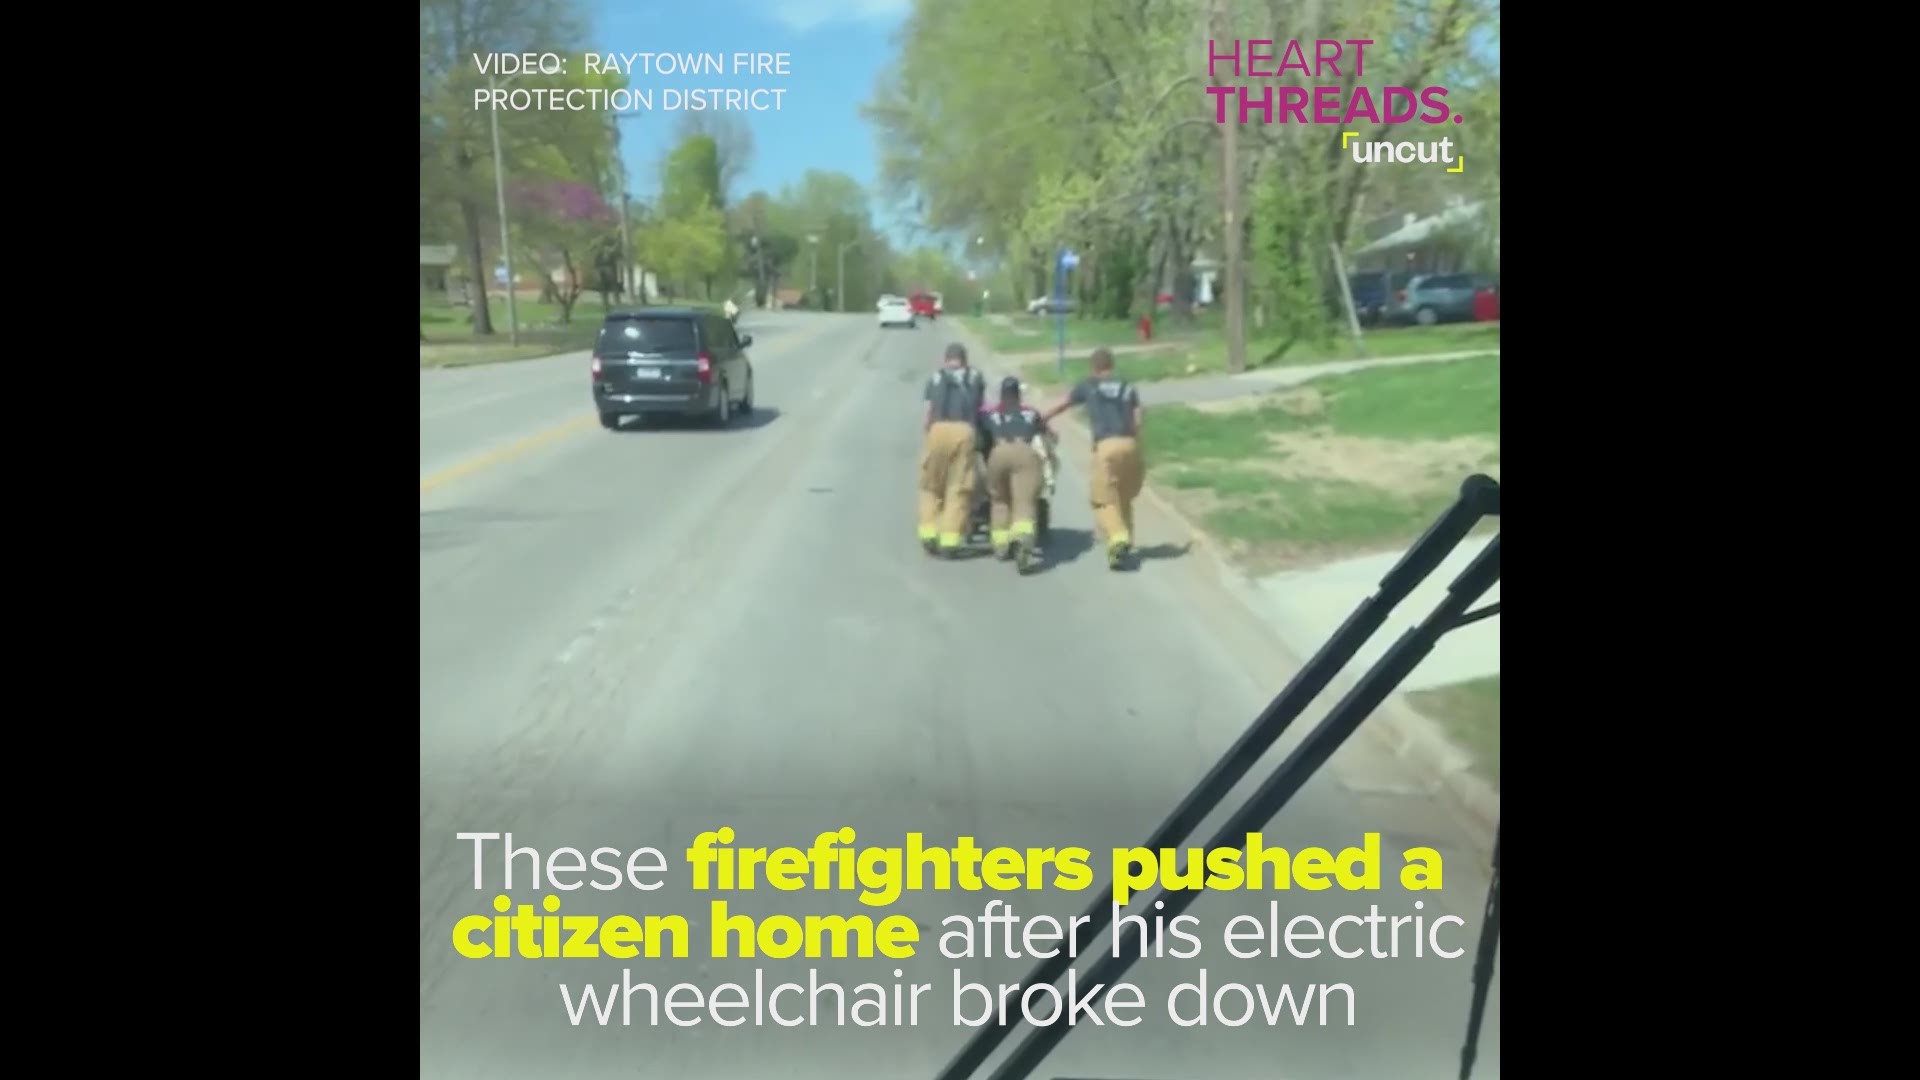 These firefighters went the extra mile, literally, to help a veteran in need.